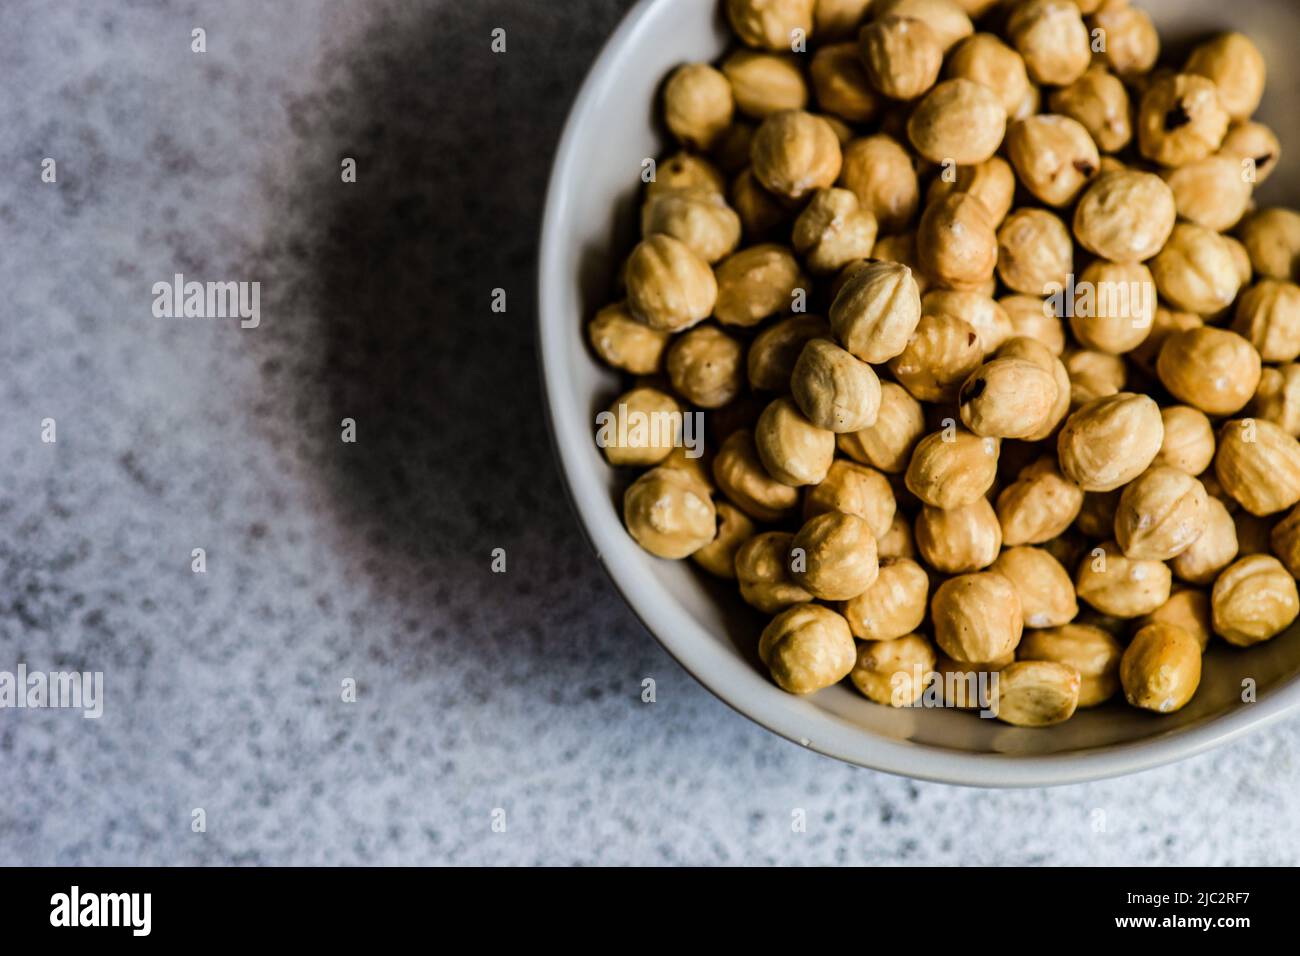 Overhead view of a bowl of hazelnuts Stock Photo